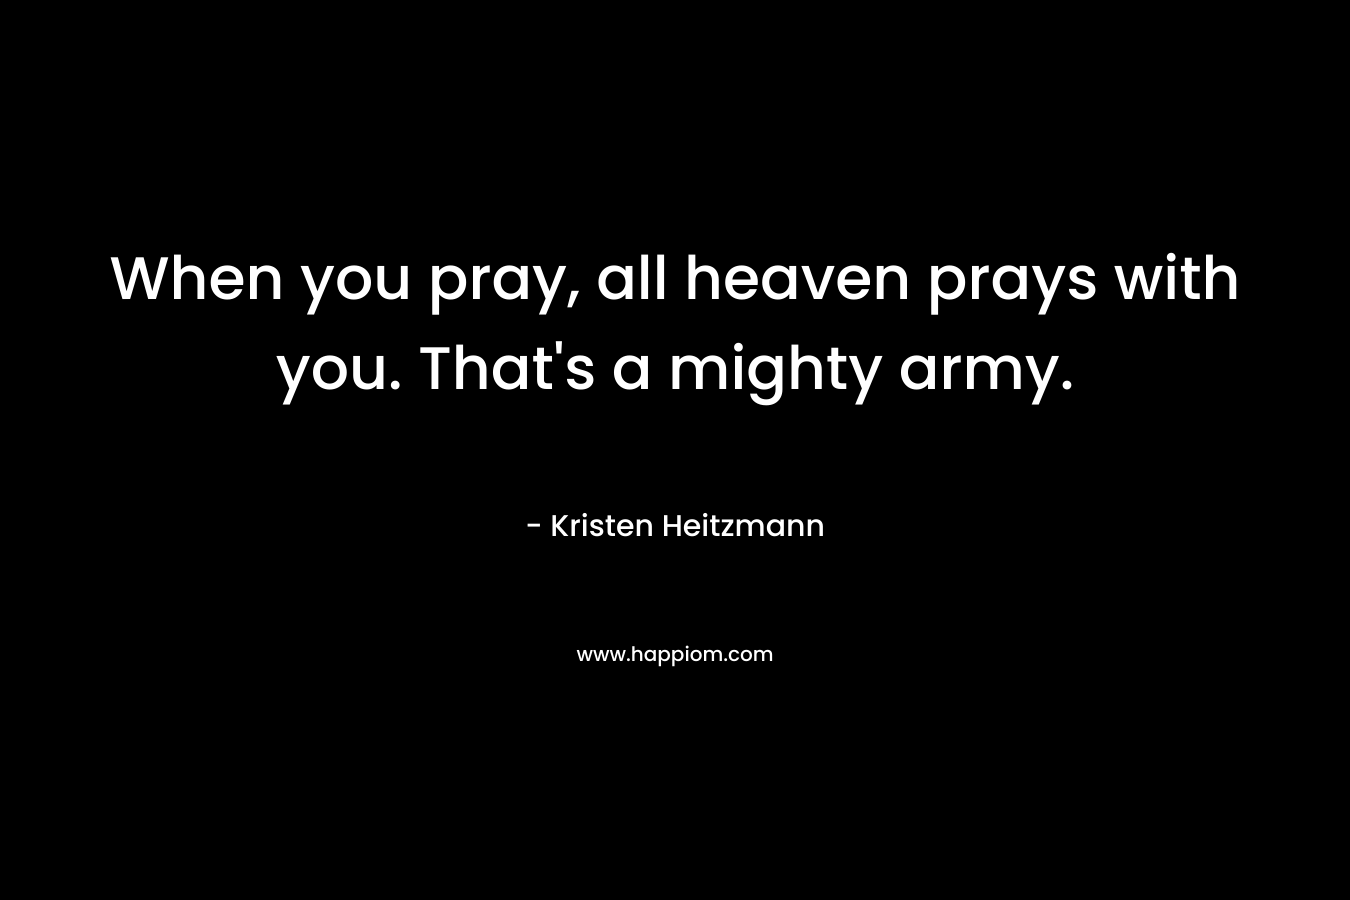 When you pray, all heaven prays with you. That's a mighty army.